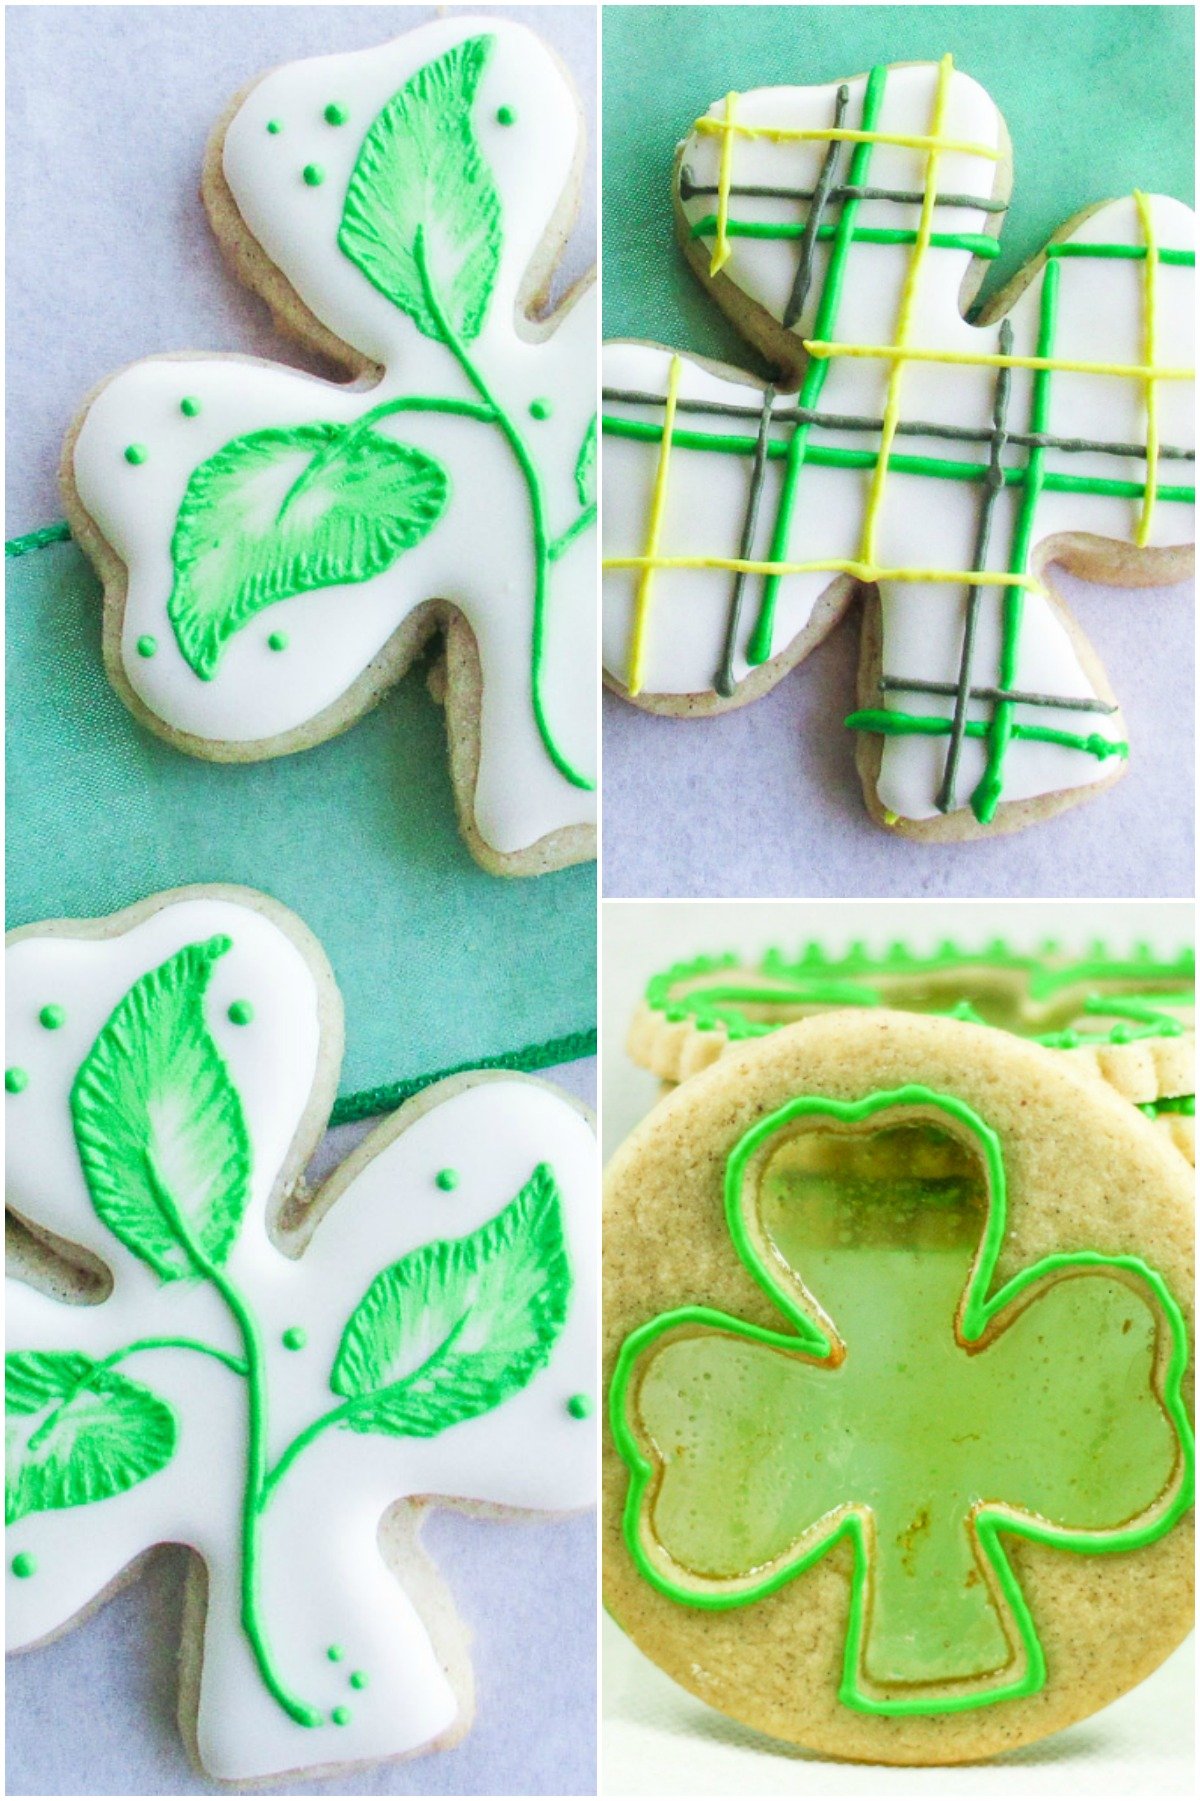 Shamrock shaped sugar cookies decorated with royal icing.